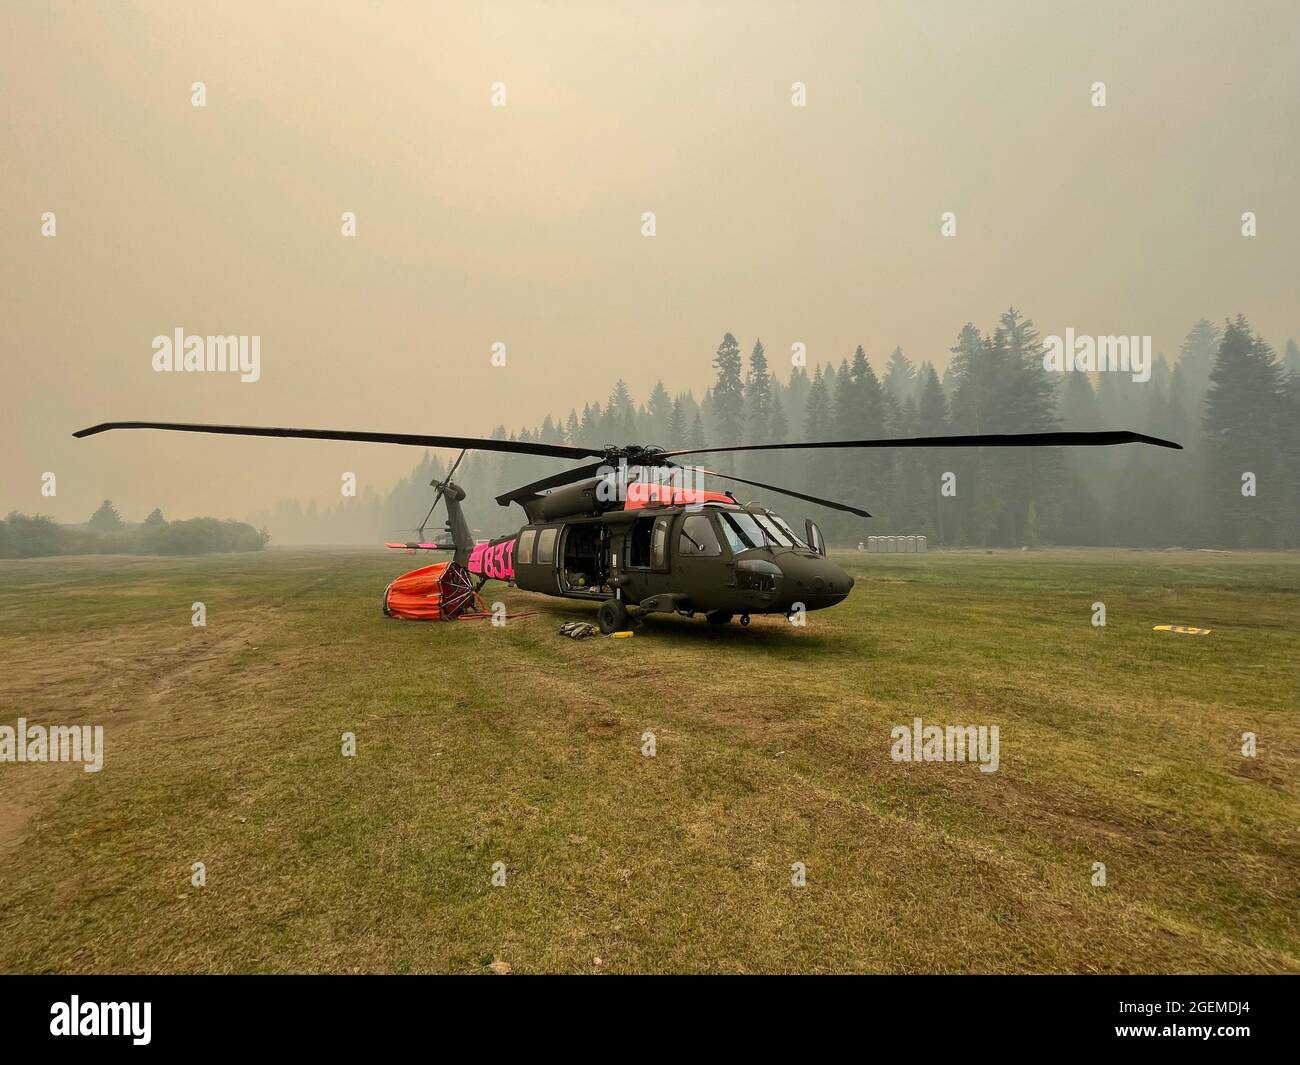 A U.S. Army UH-60 Black Hawk helicopter flown by the California Army National Guard is positioned at the Battle Creek helibase near Mineral, California, Aug. 17, 2021, while fighting the Dixie Fire. The fire eclipsed 600,000 acres and is currently the second-largest fire in California’s recorded history. (U.S. Army National Guard photo by 1st Lt. Rockne Harmon) Stock Photo